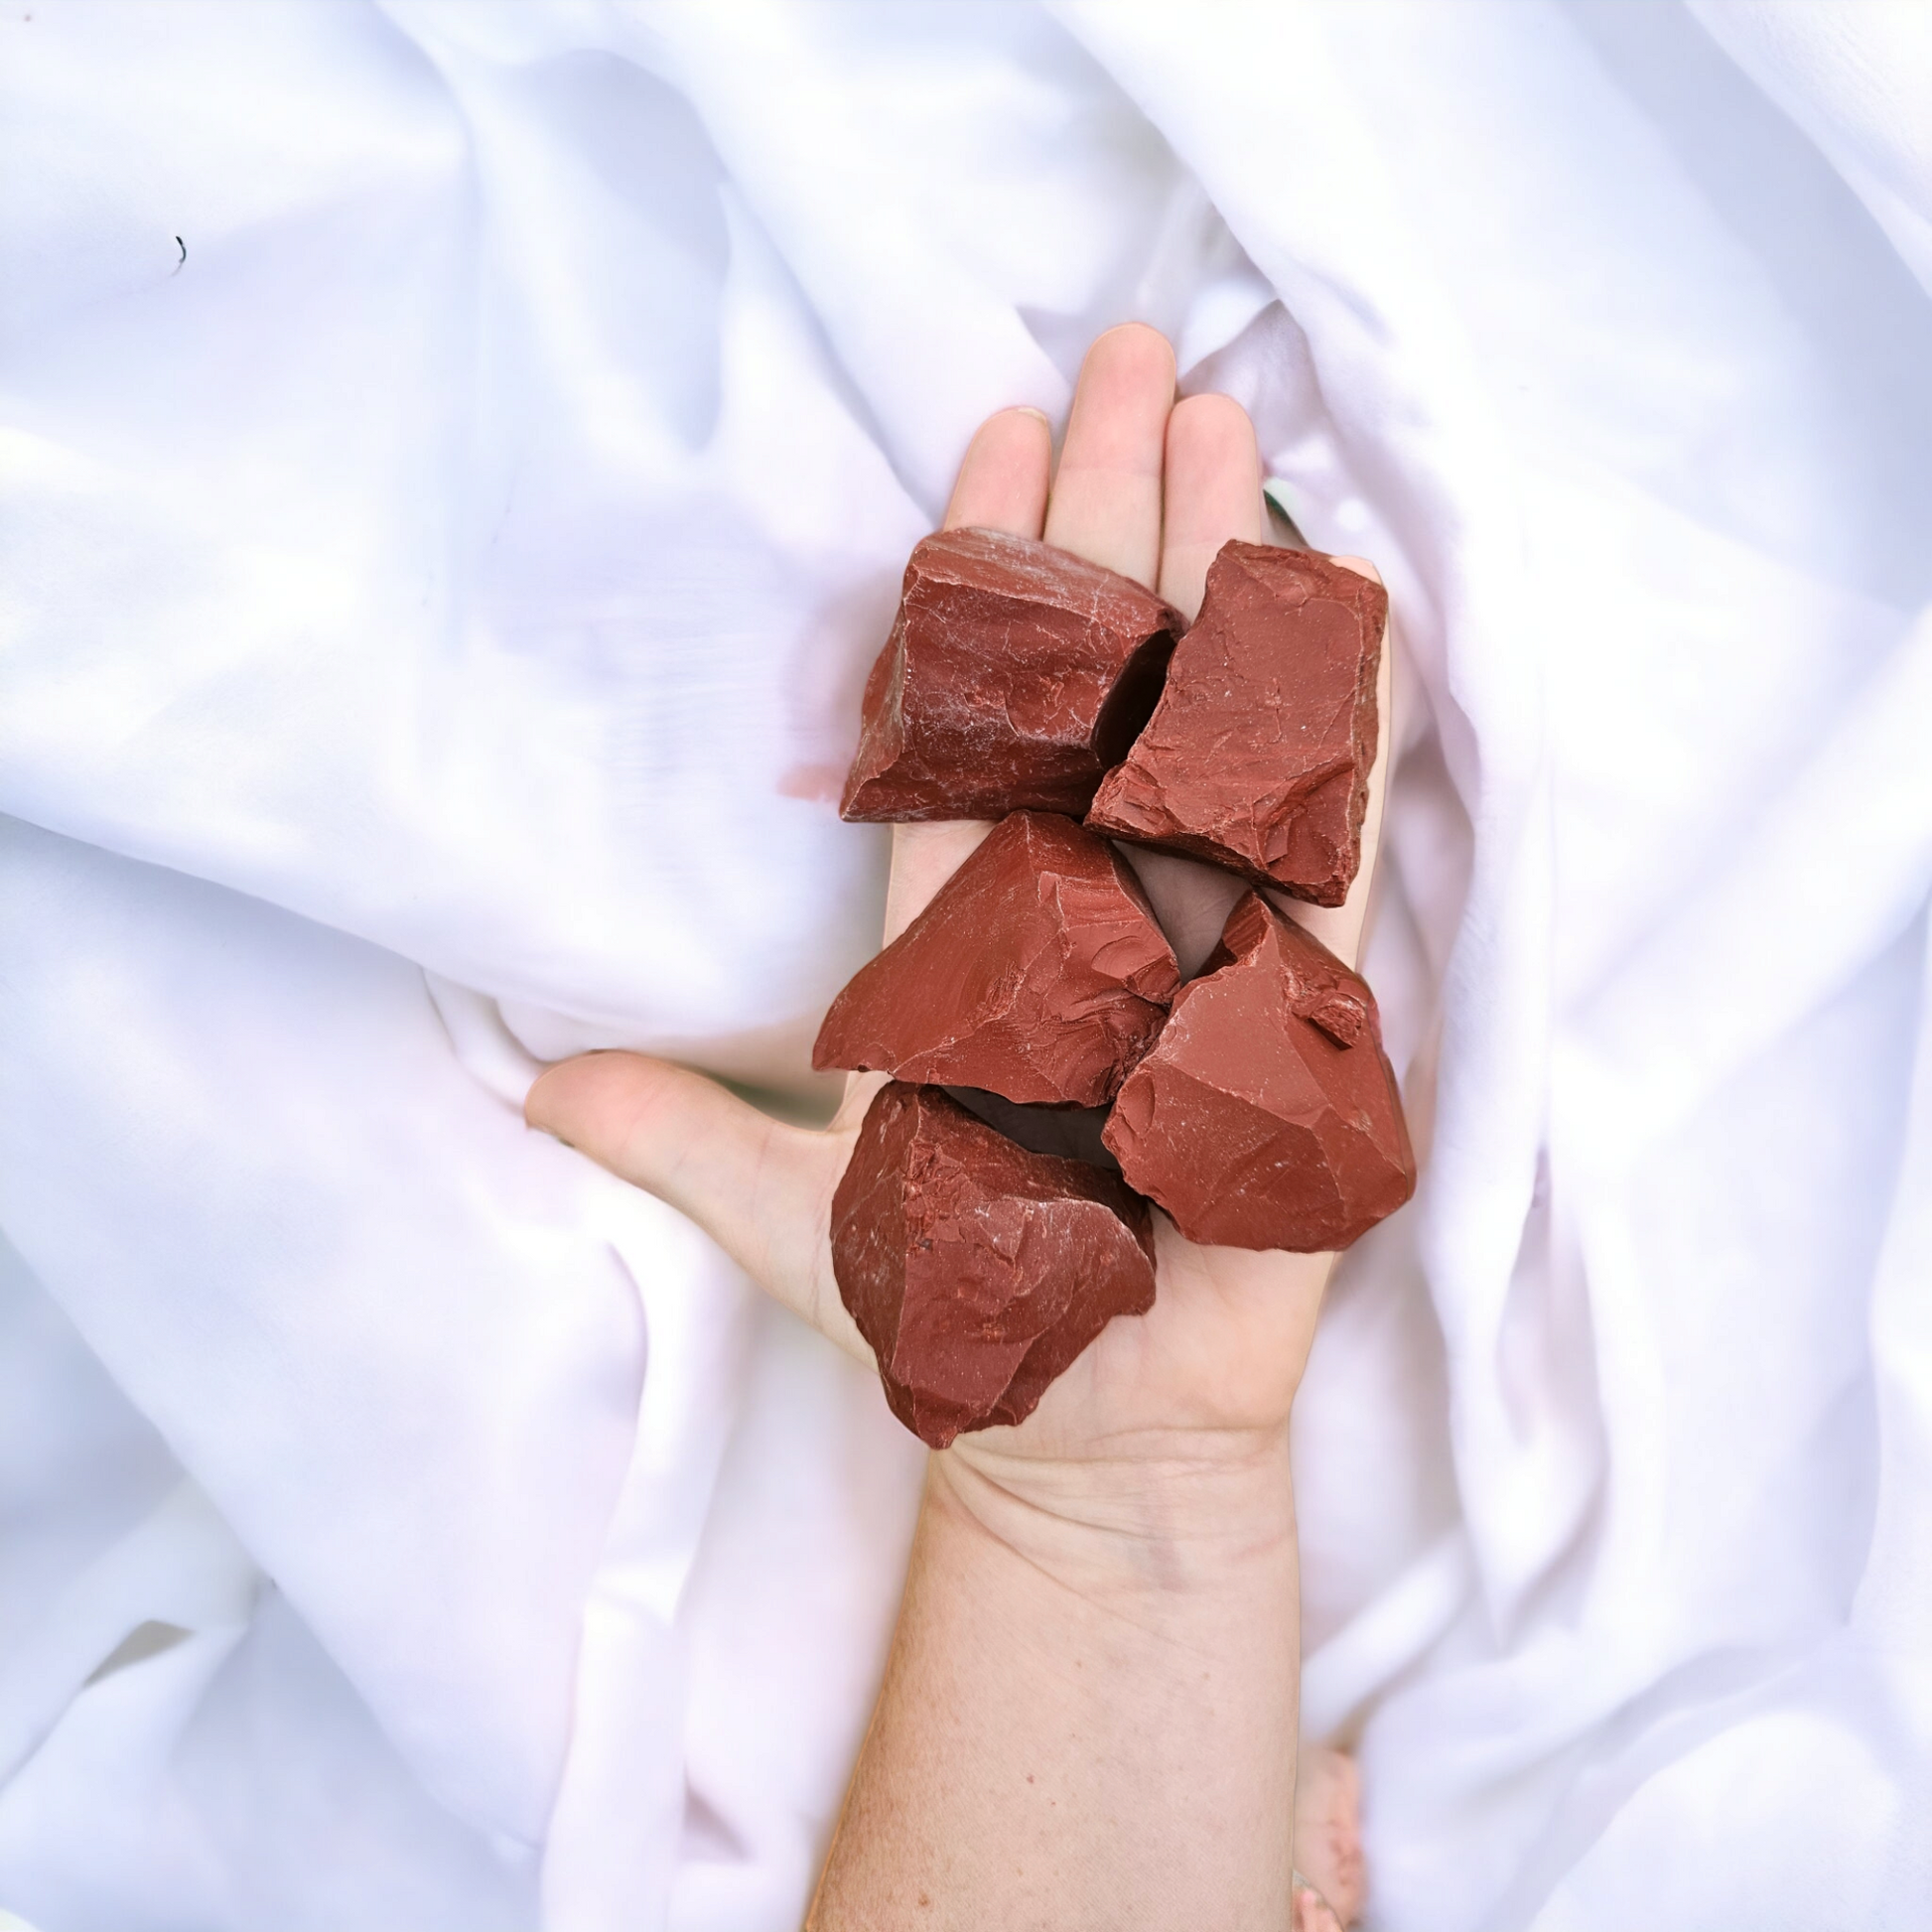 red jasper raw chunk crystals sold at crystal shop in Australia.